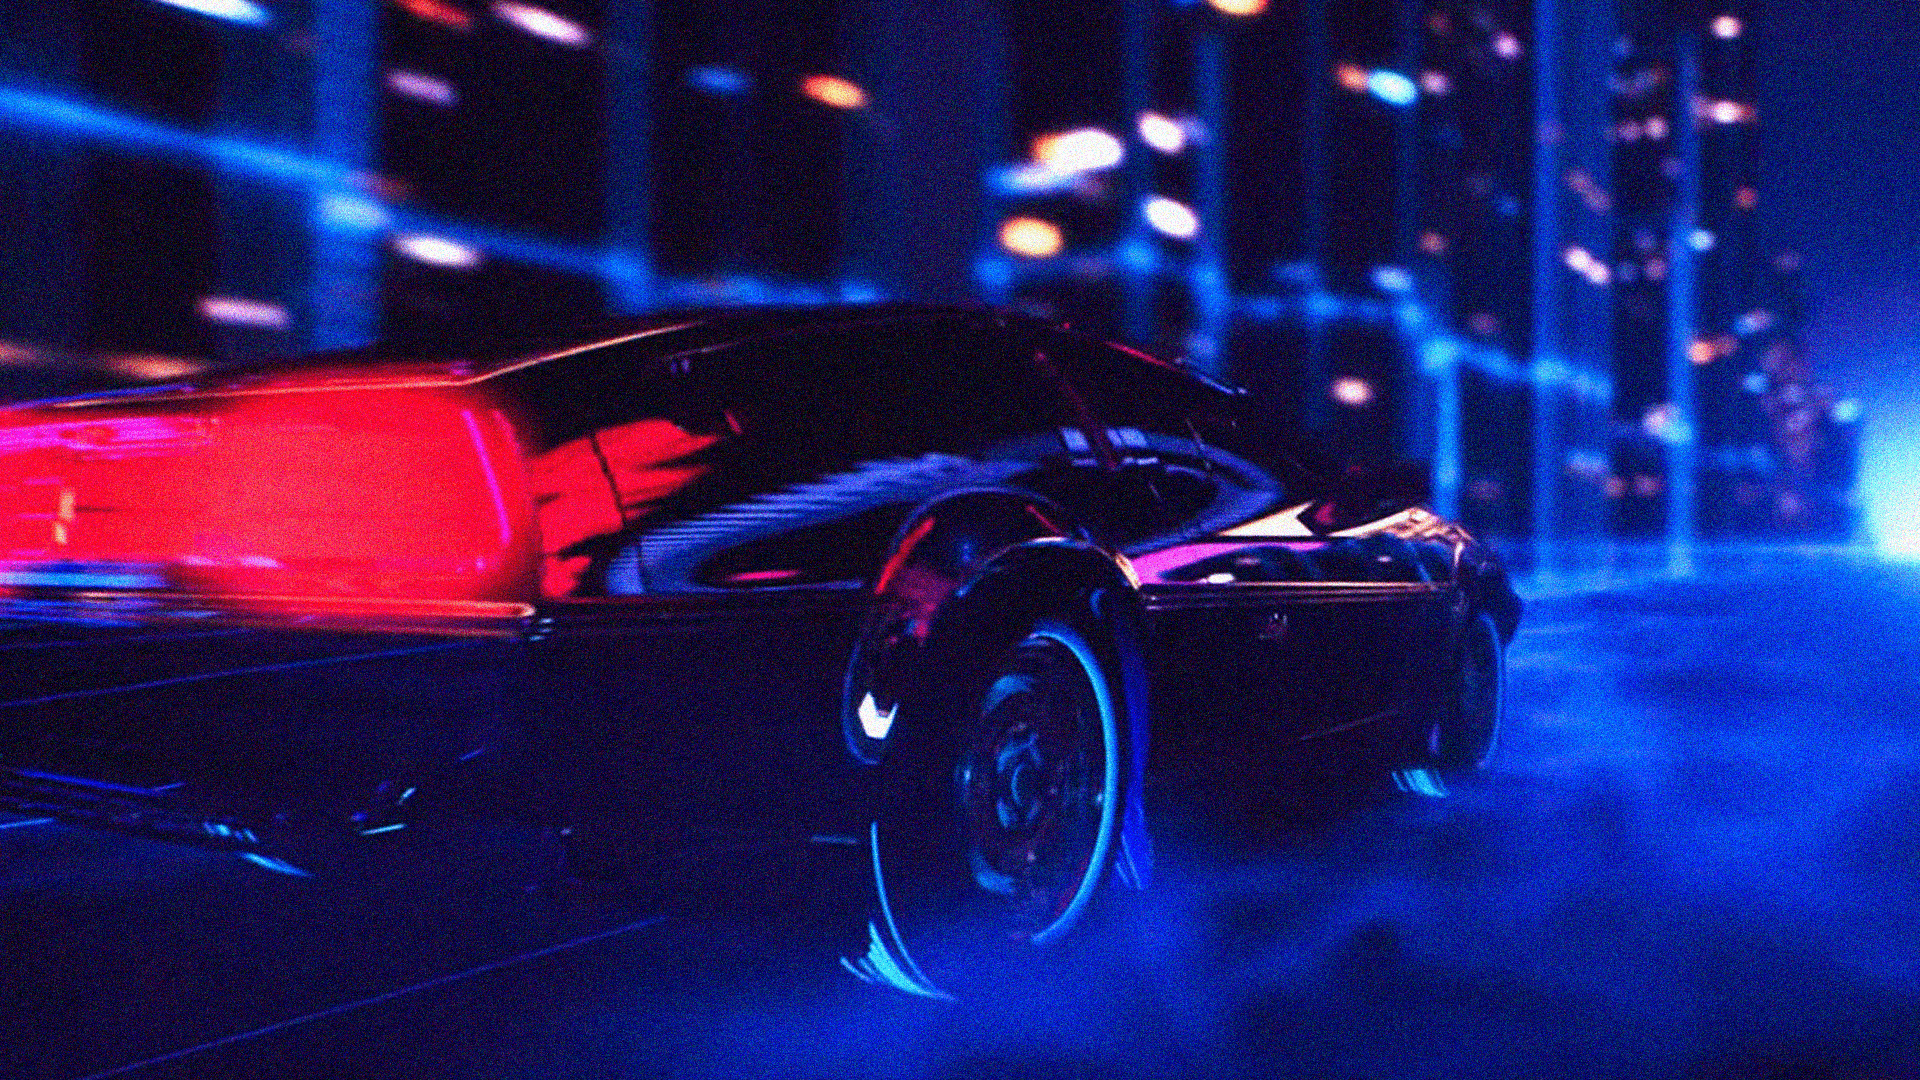 City Retrowave Synthwave Art Wallpapers - Wallpaper Cave